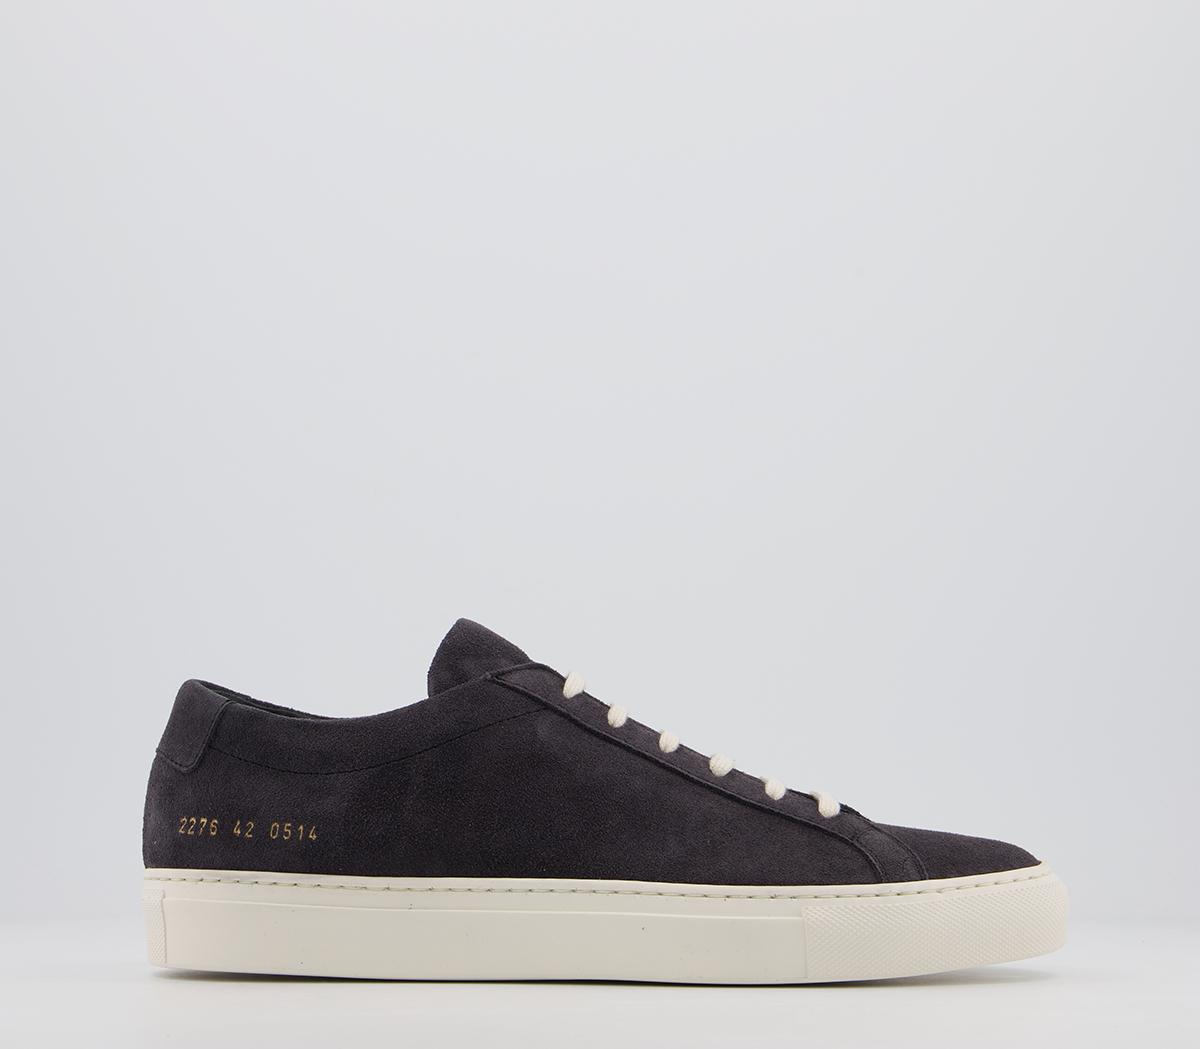 Common ProjectsAchilles Low TrainersWashed Black Suede